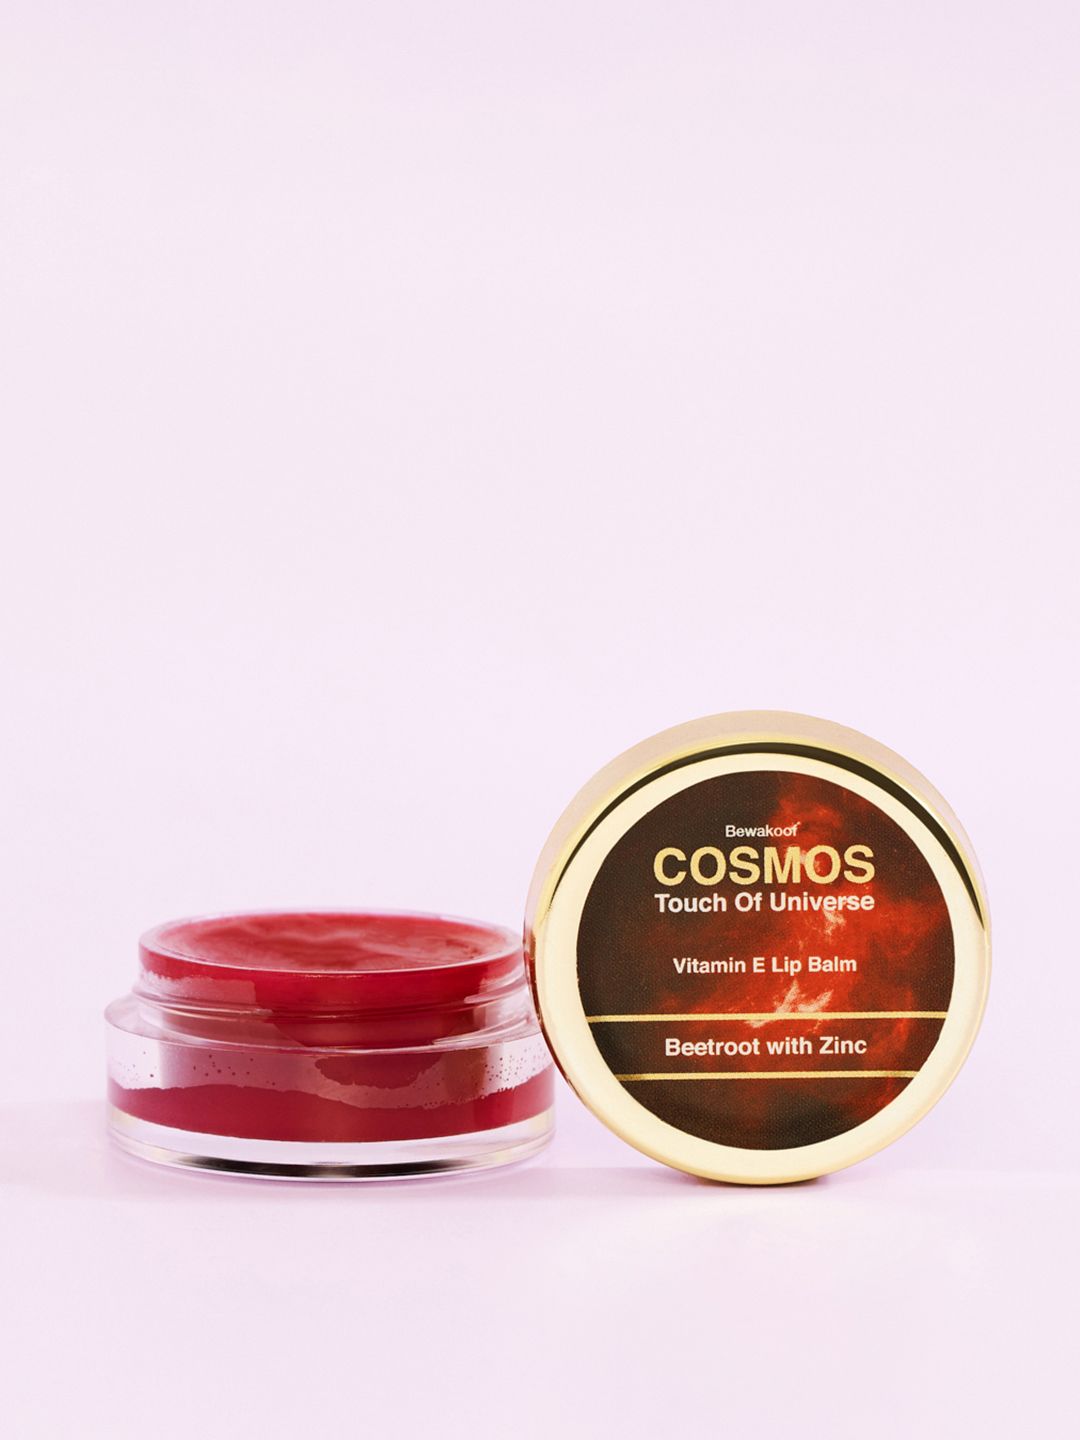 BEWAKOOF COSMOS White Lip Balm with Vitamin E and Beetroot & Zinc - 10 gm Price in India